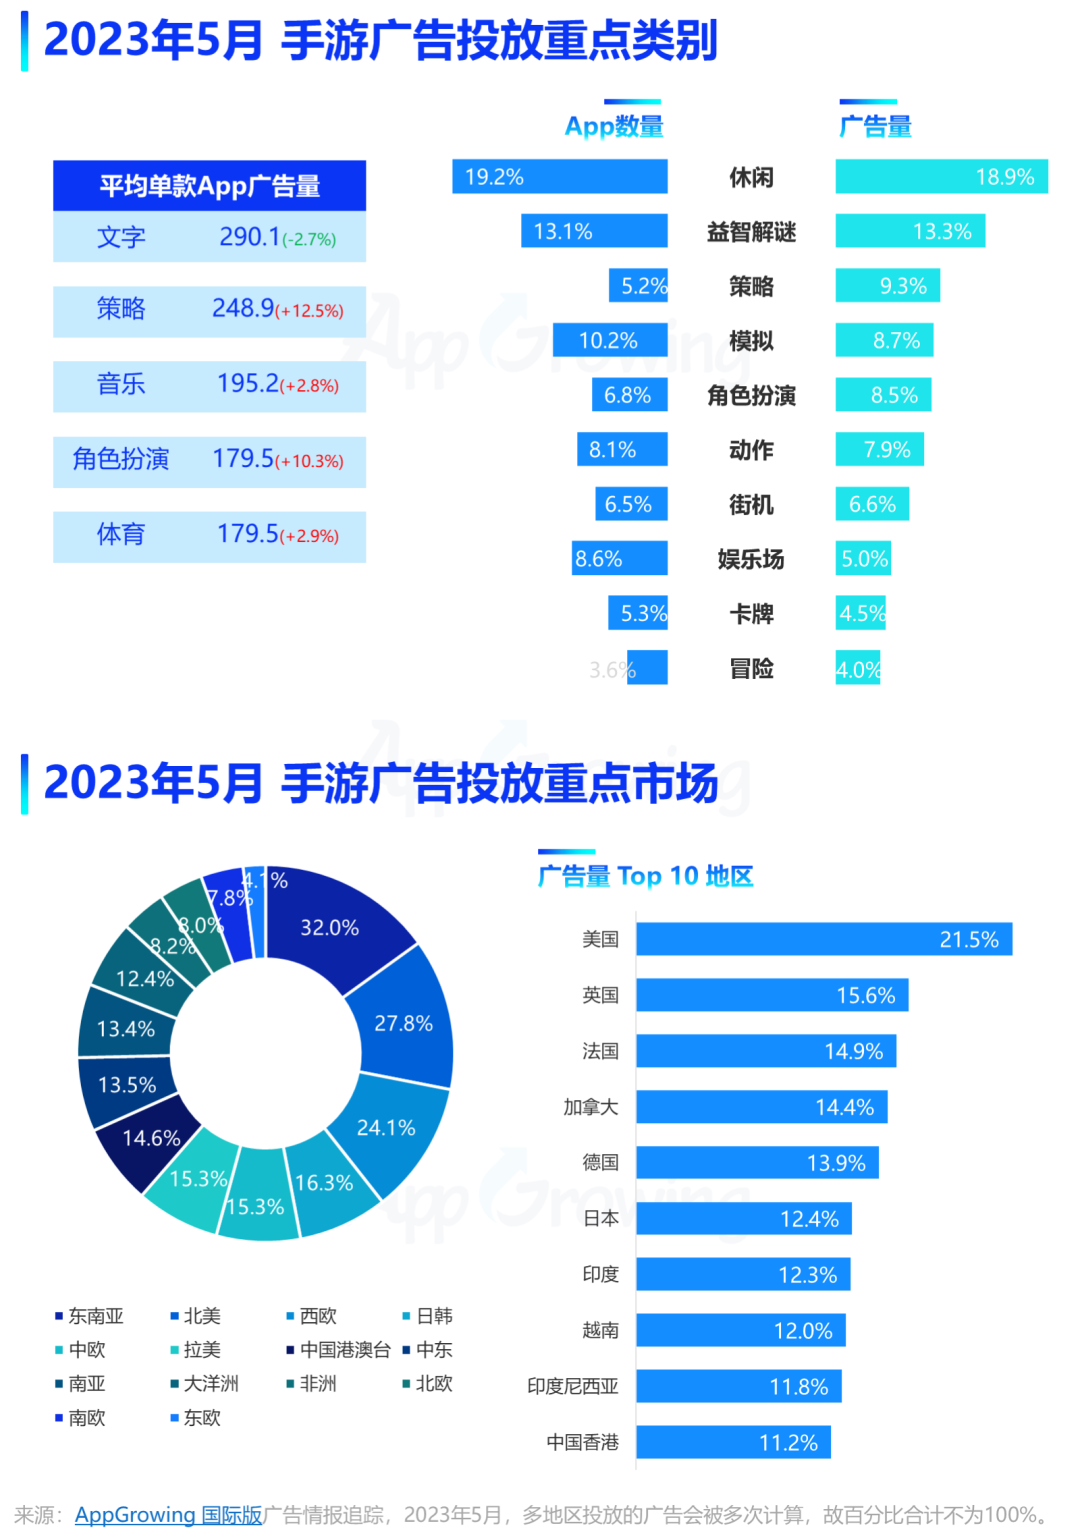 2023 May game advertising trend